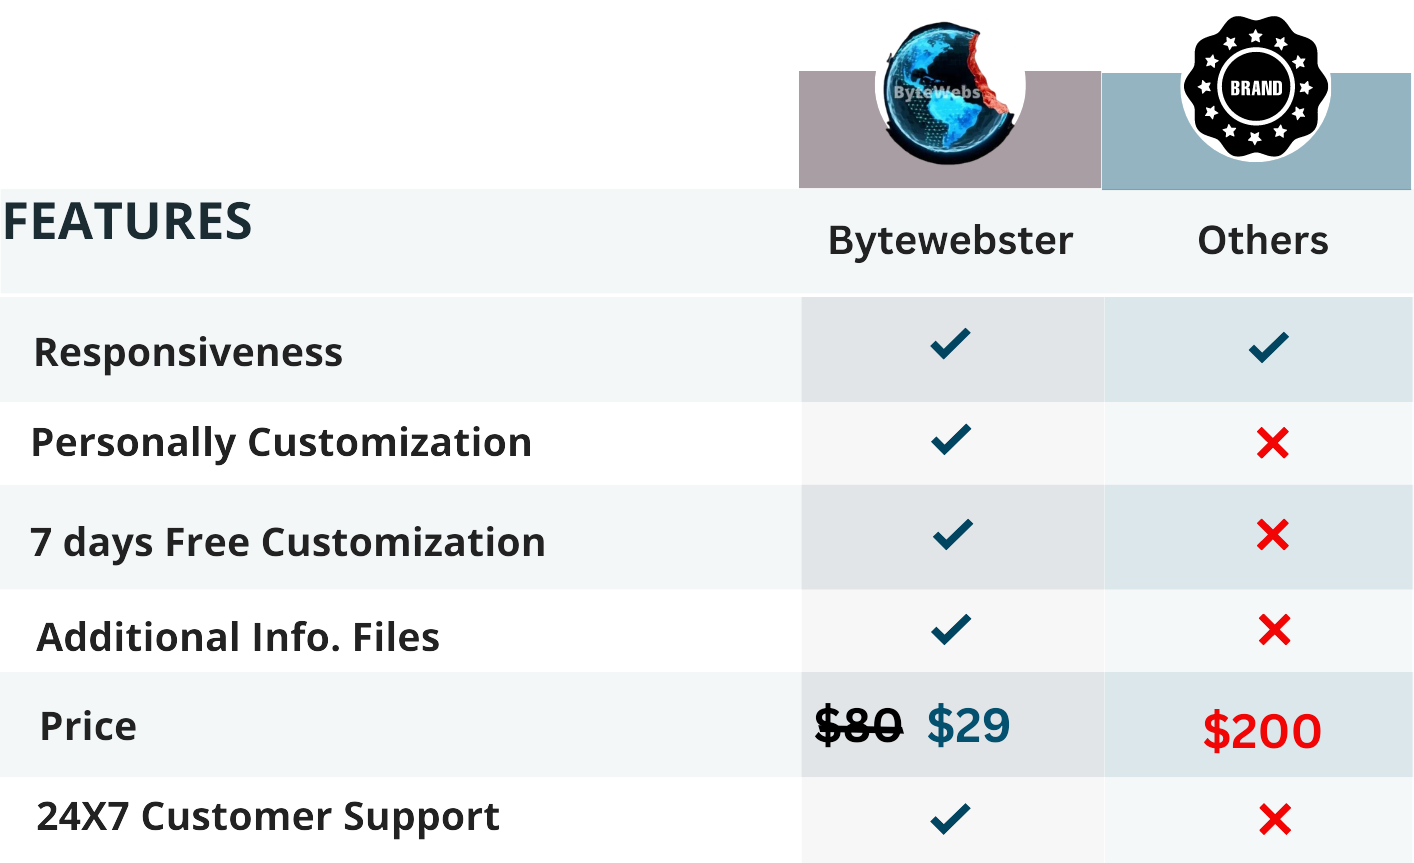 Why Bytewebster is Better than Others?